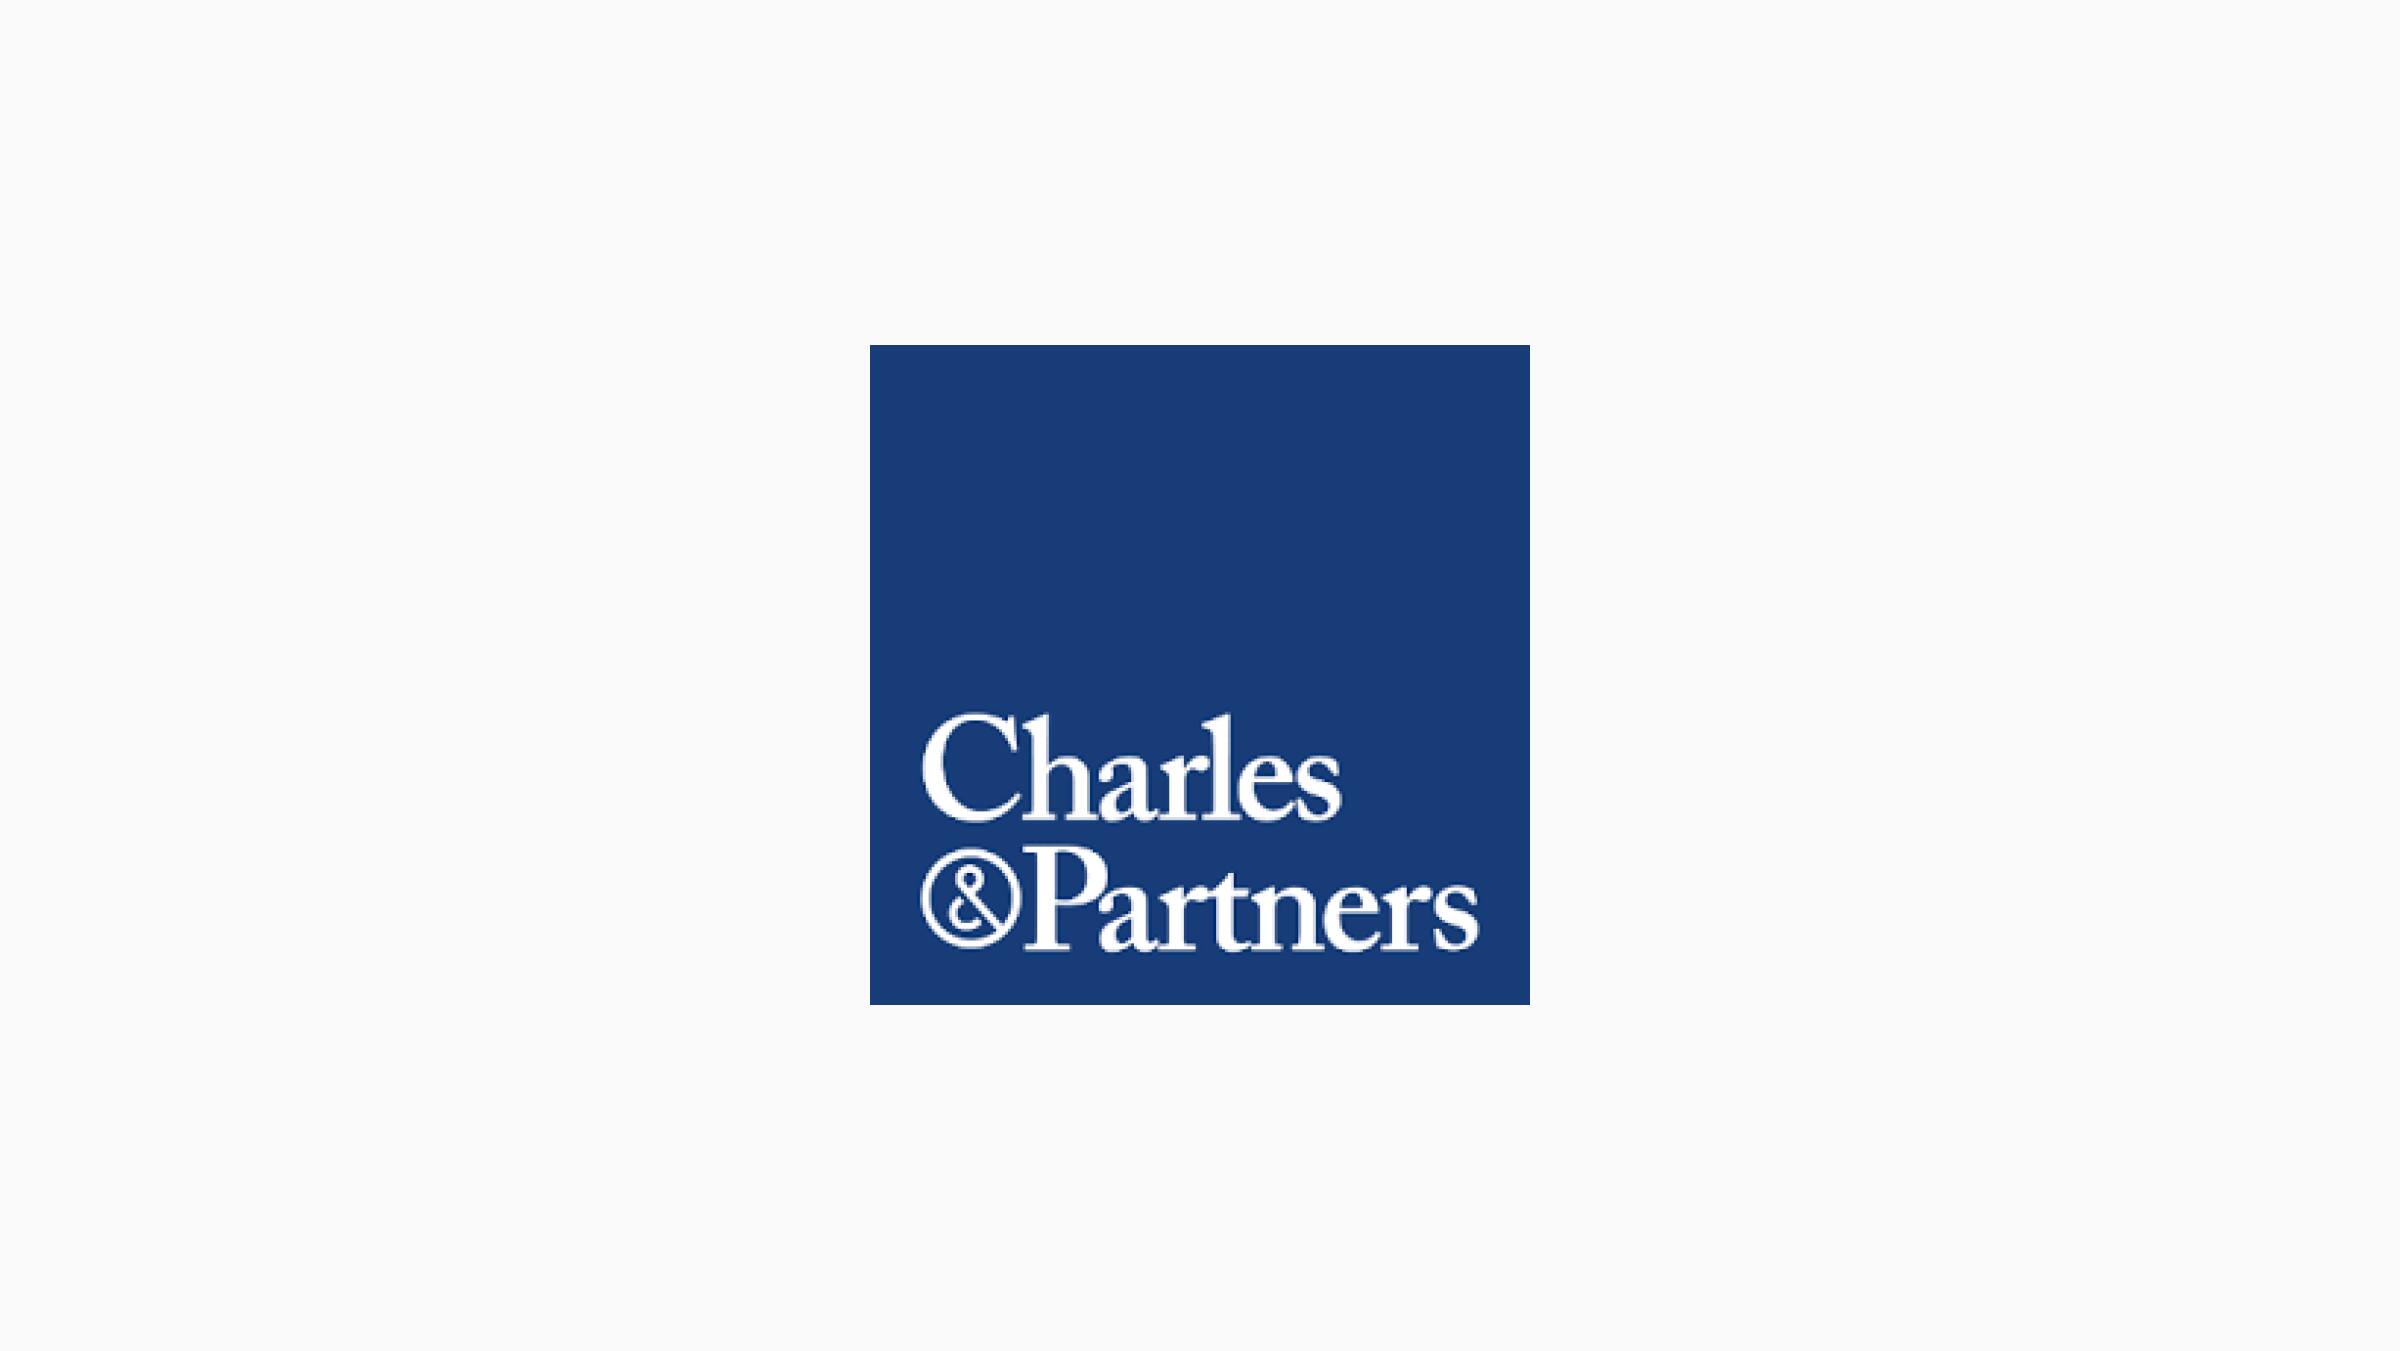 The Charles & Partners logo